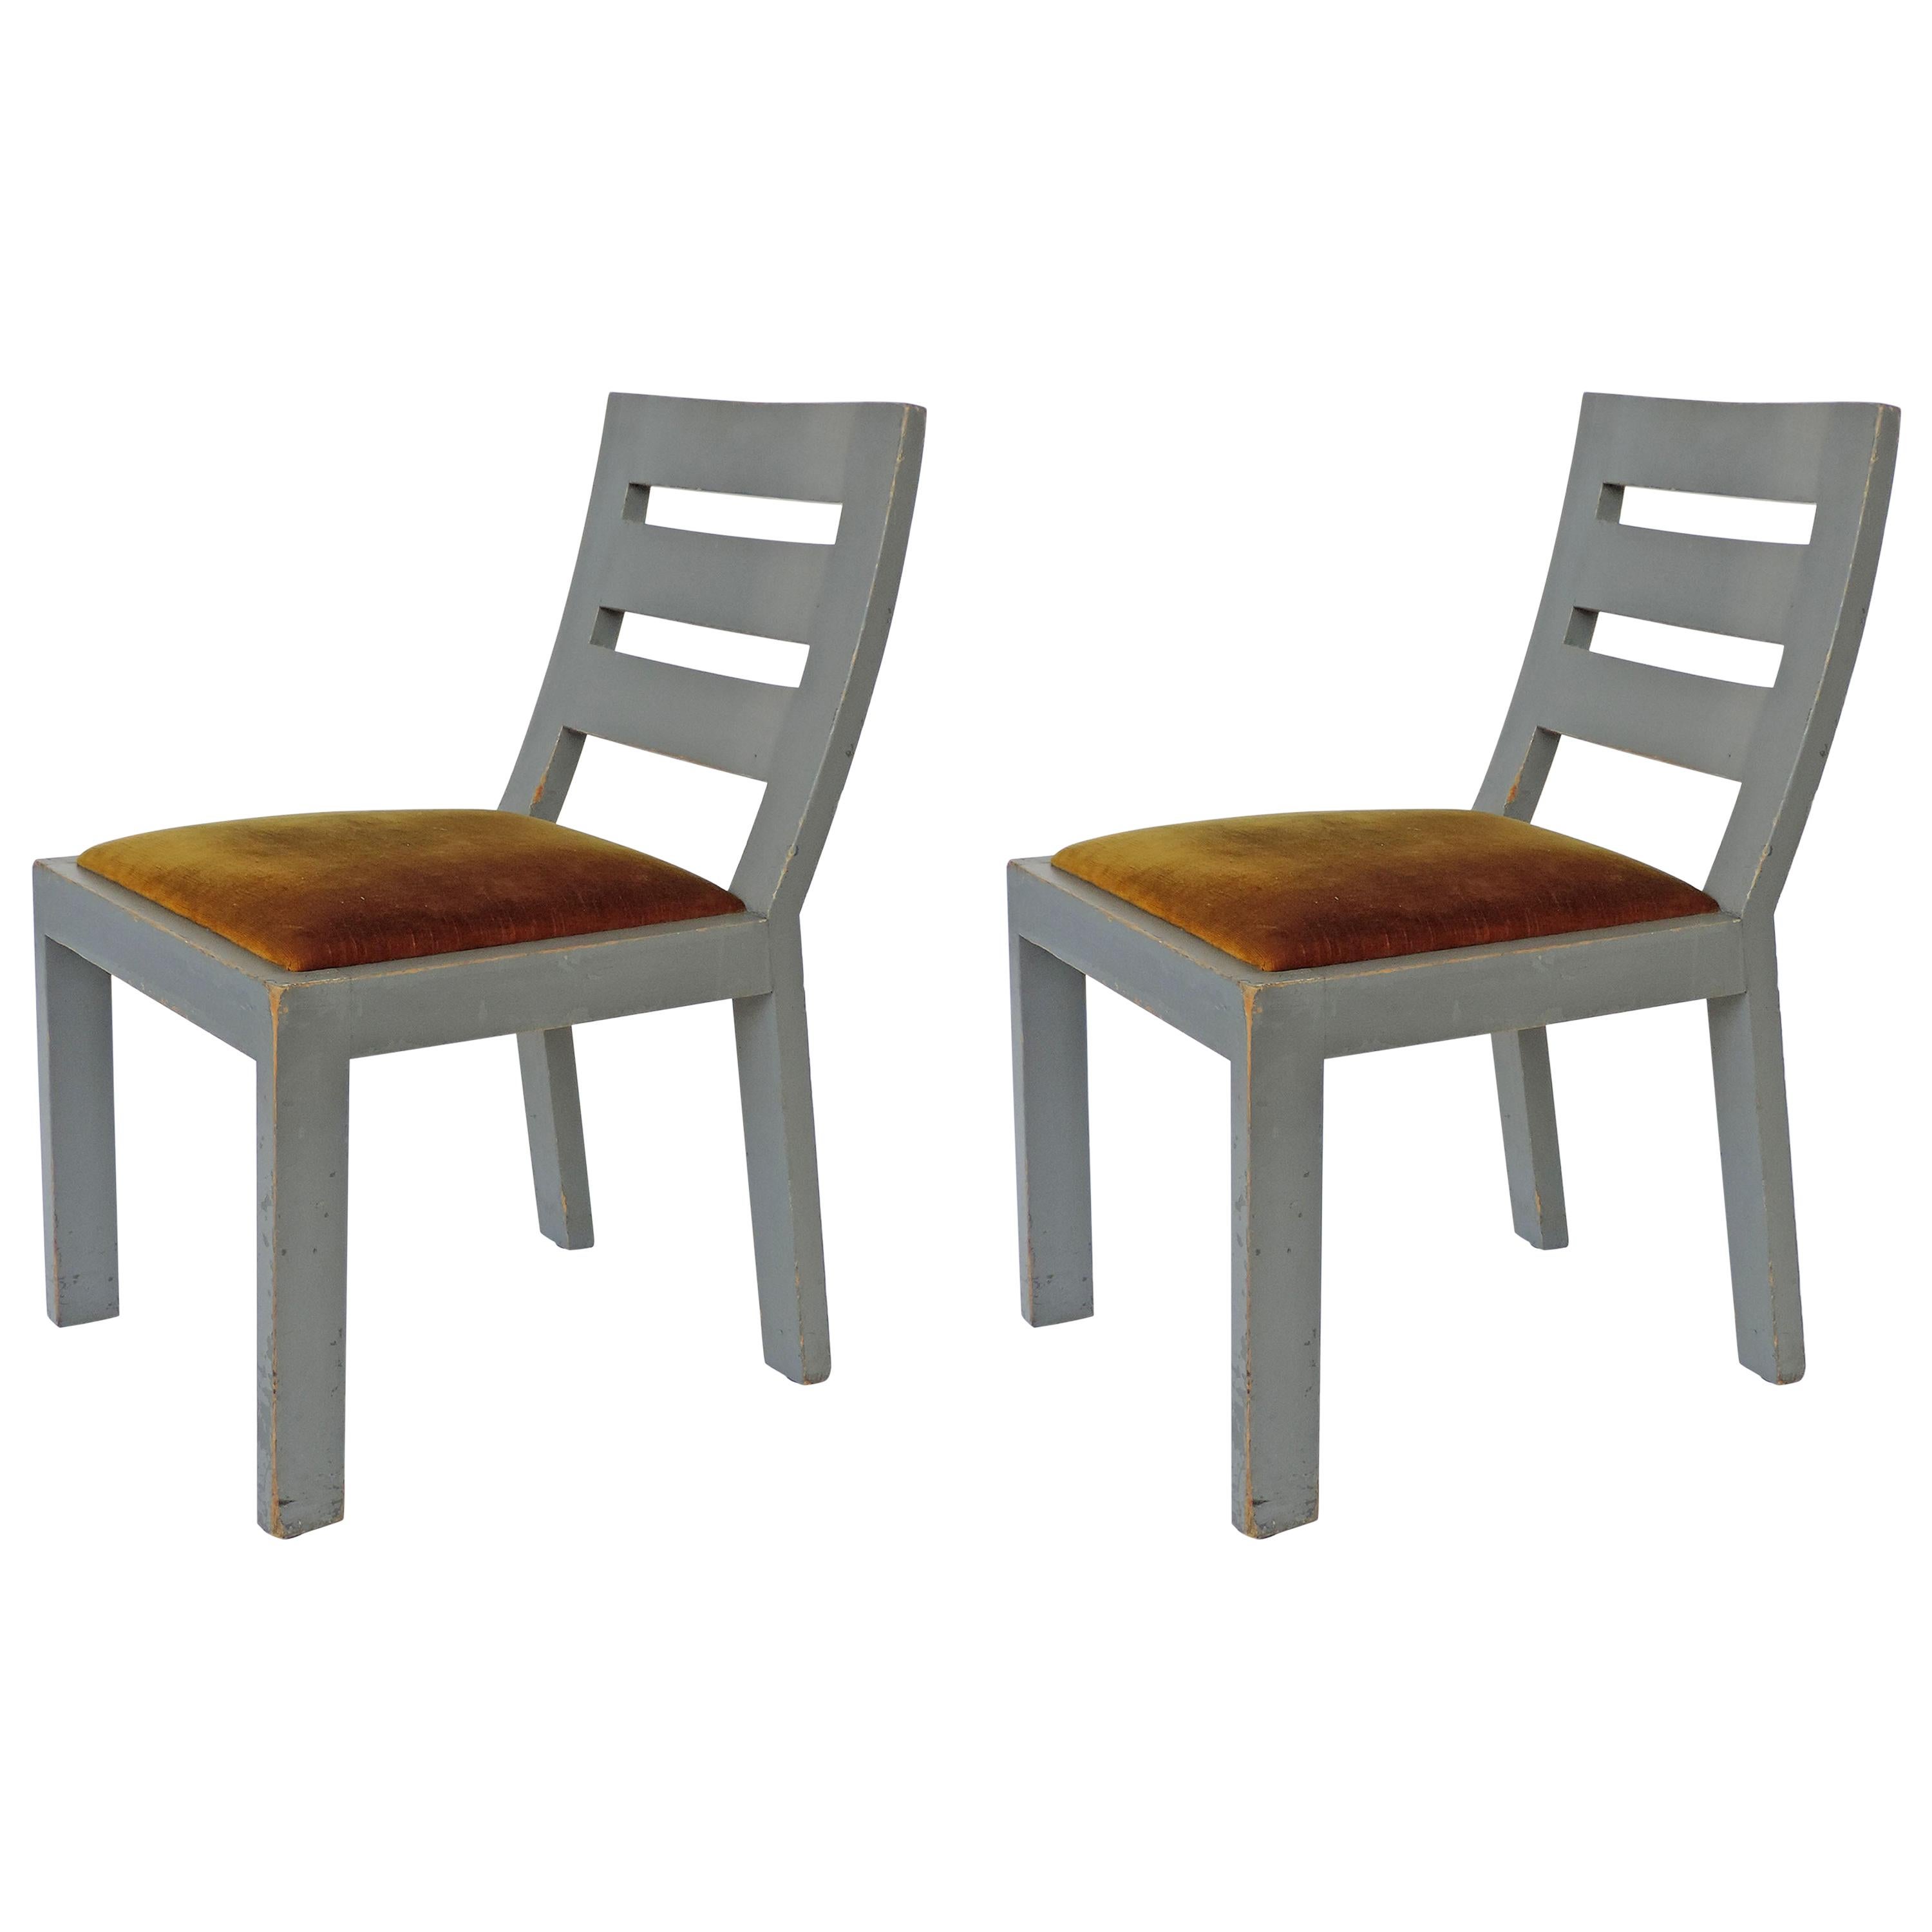 Pair of Italian Rationalist Movement Chairs, Italy, 1930s